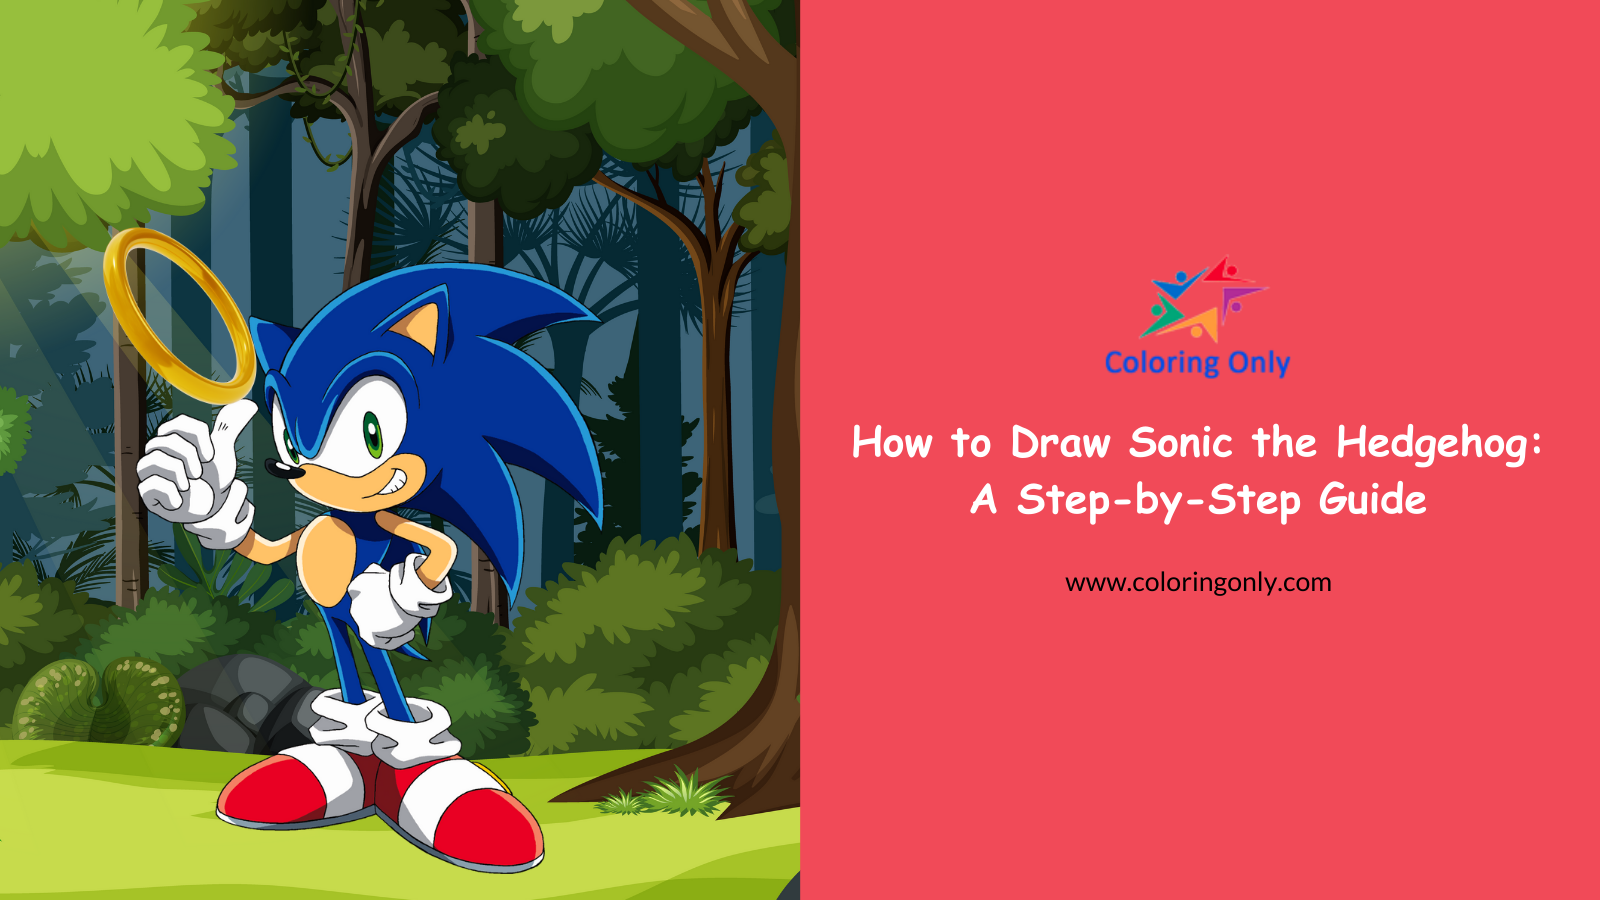 How to Draw Sonic the Hedgehog: A Step-by-Step Guide